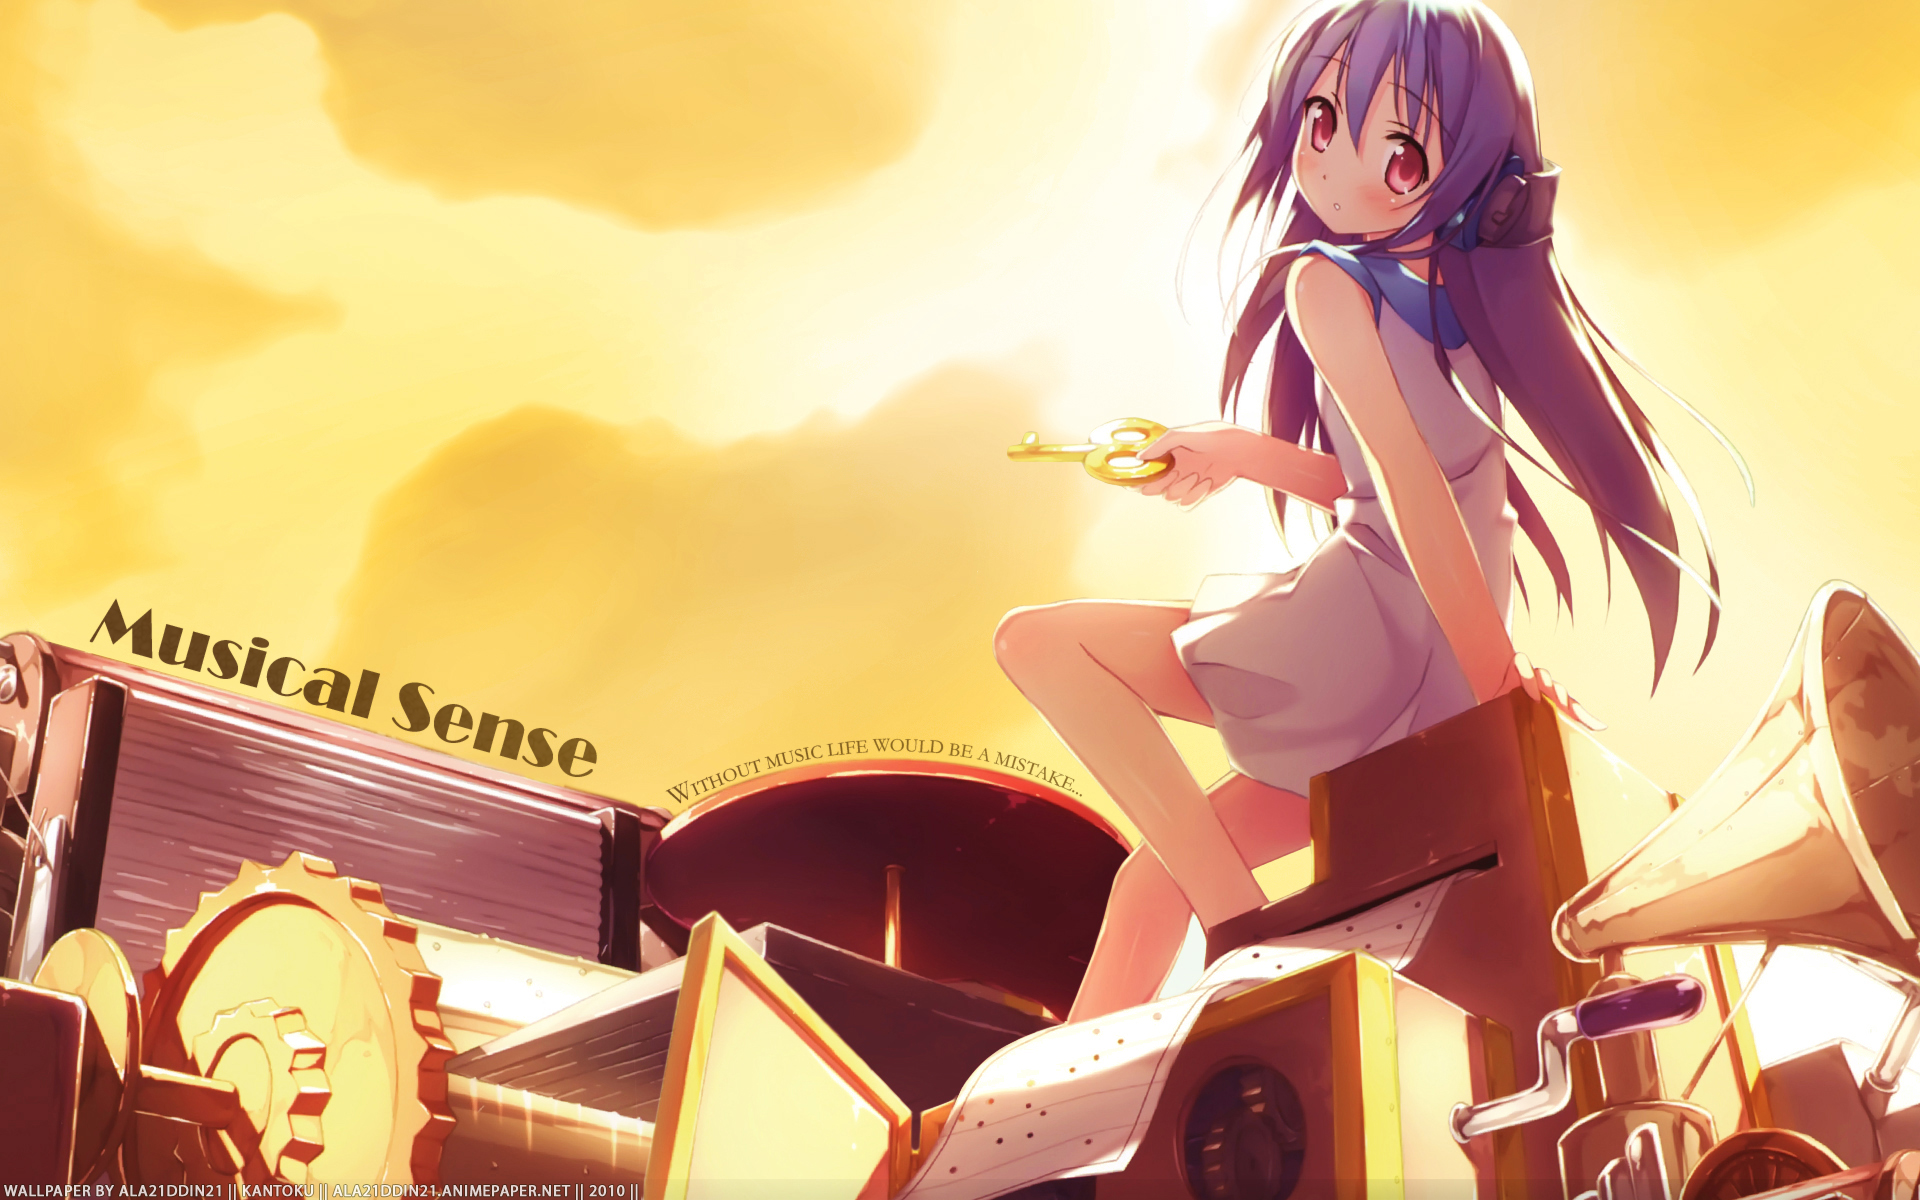 Anime-themed desktop wallpaper with headphones, created by カントク.